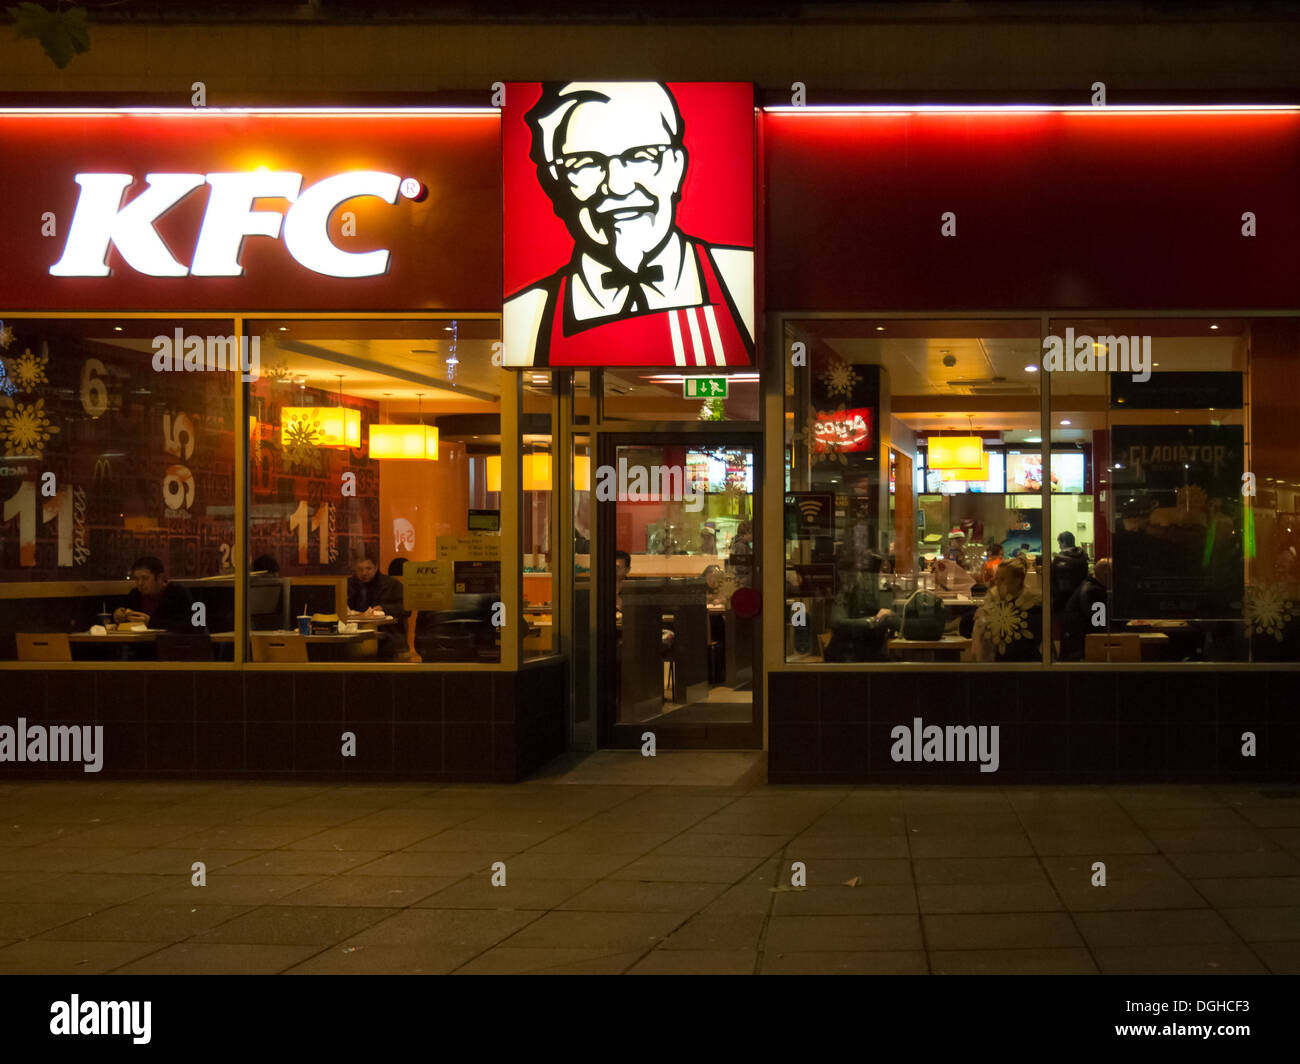 The exterior of a KFC fast food restaurant at night Stock Photo